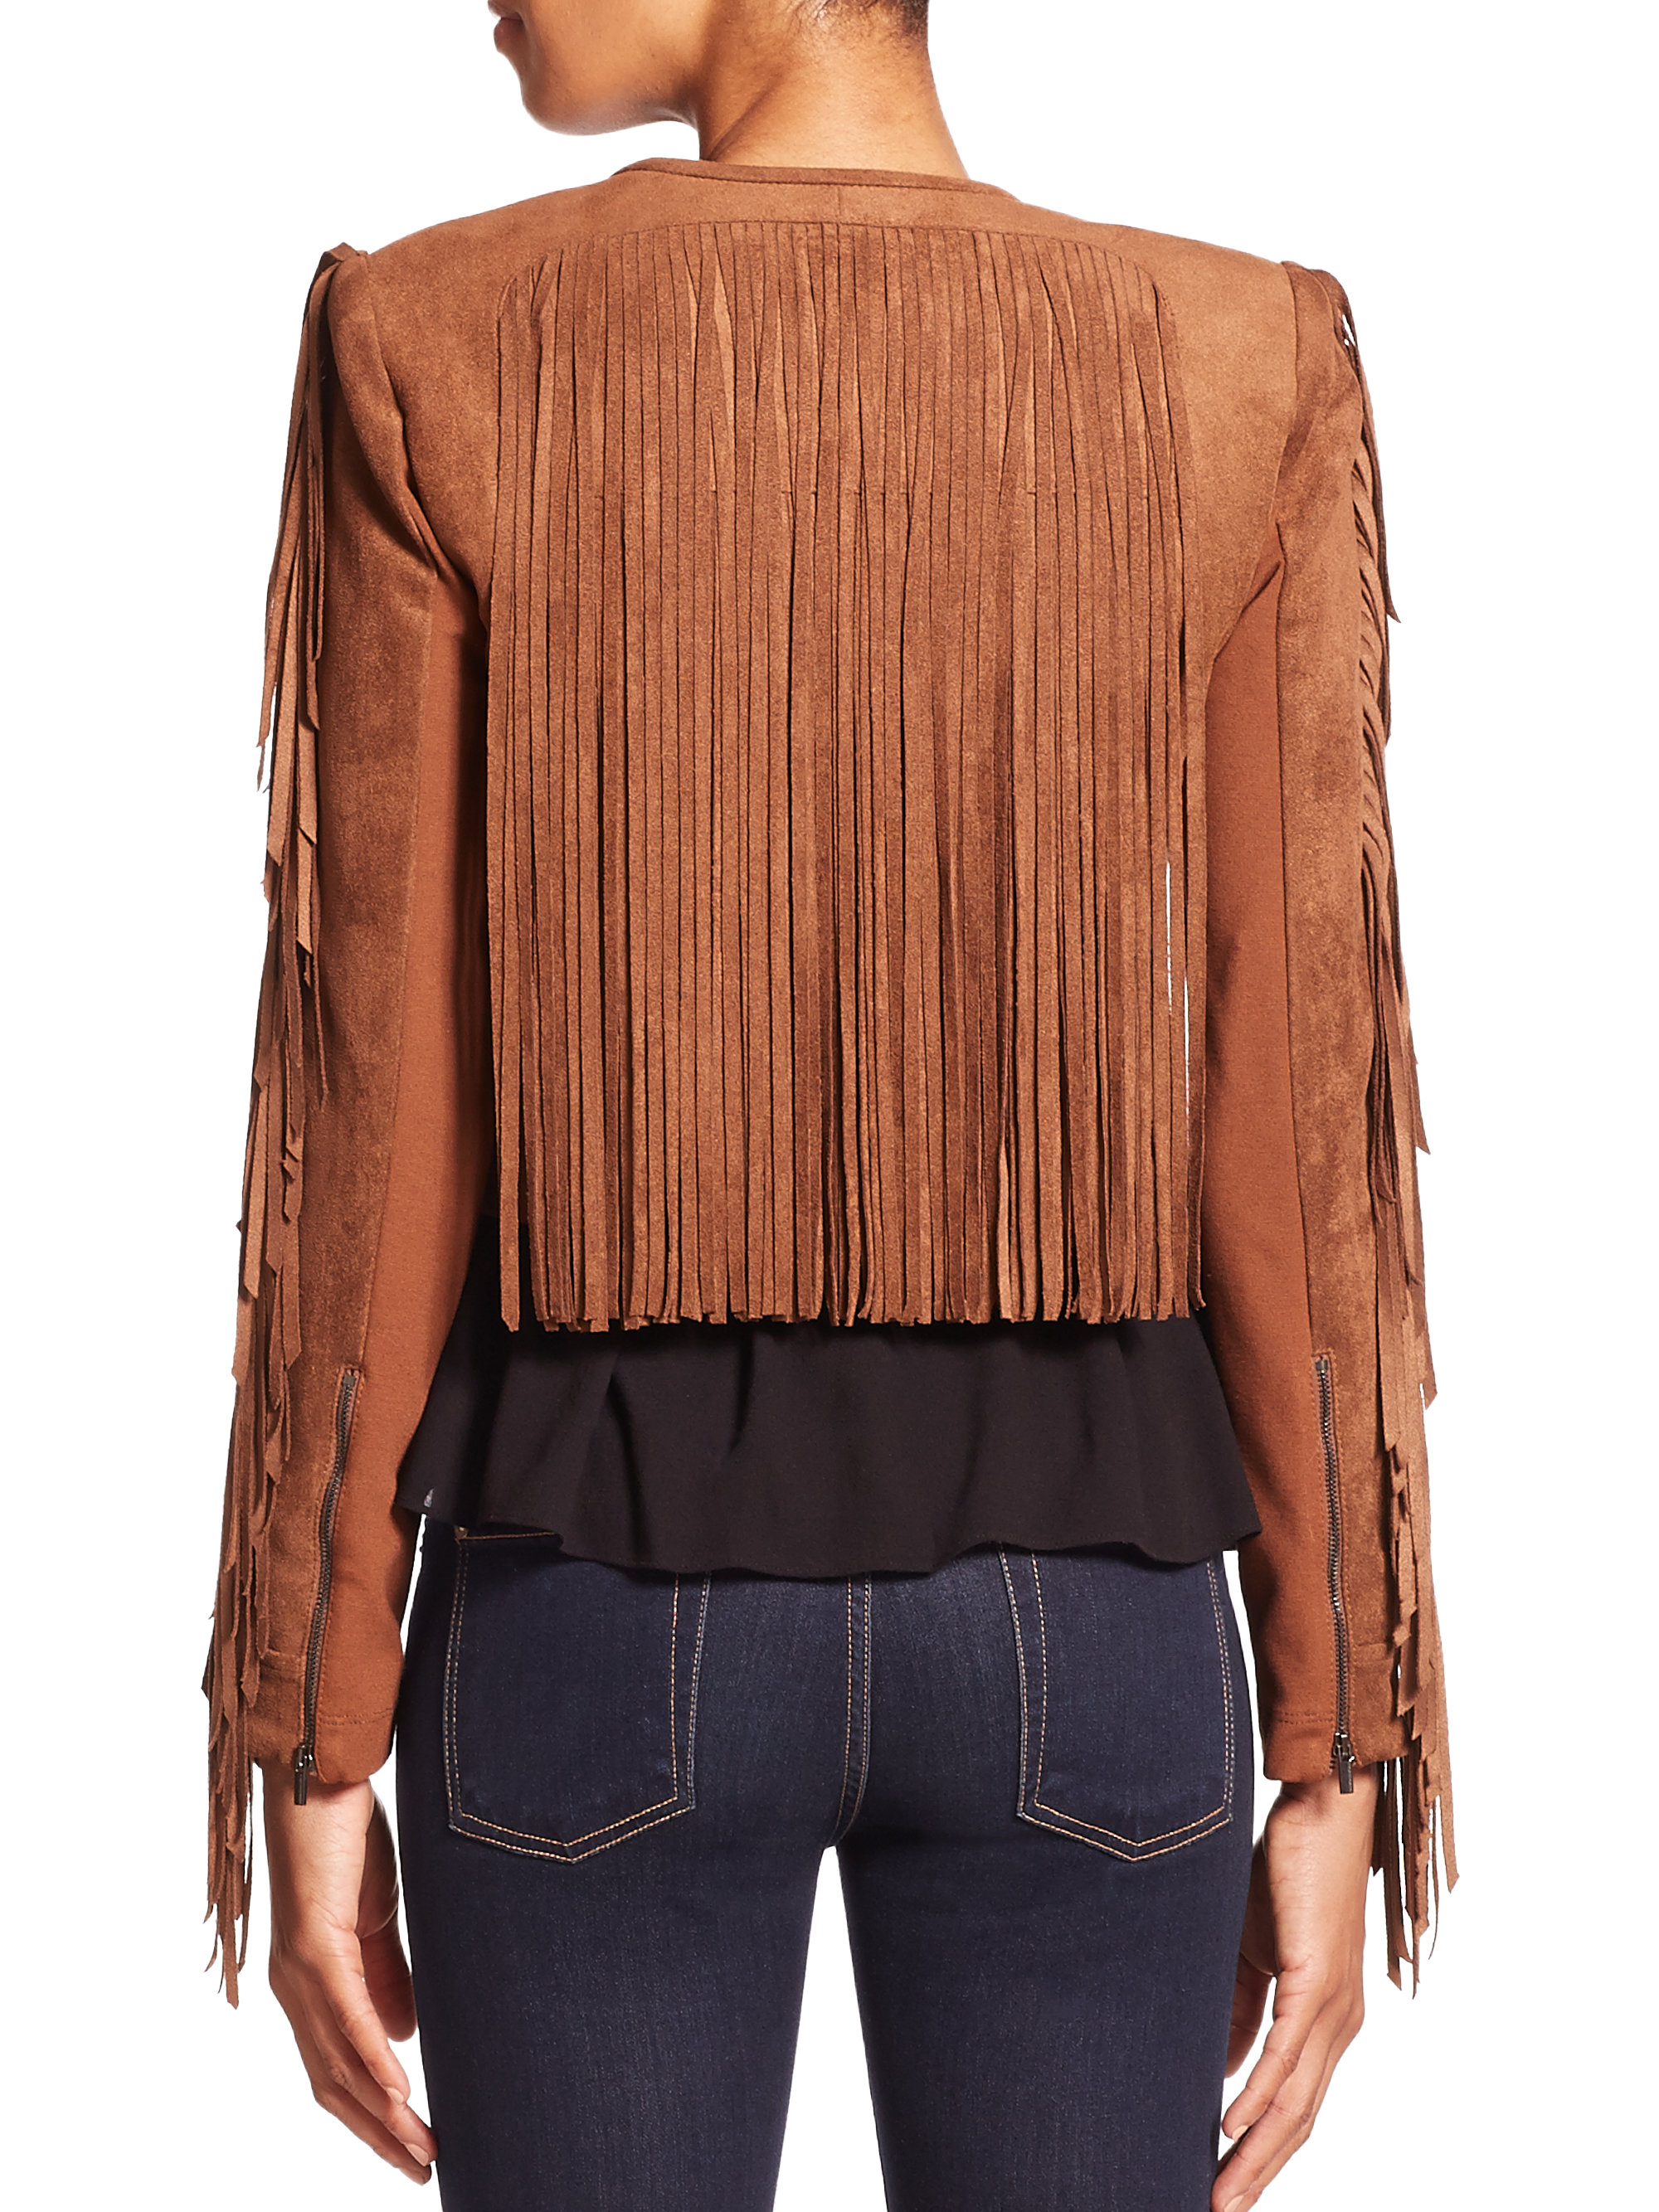 Lyst - BCBGMAXAZRIA Farrell Cropped Faux Suede Fringe Jacket in Brown